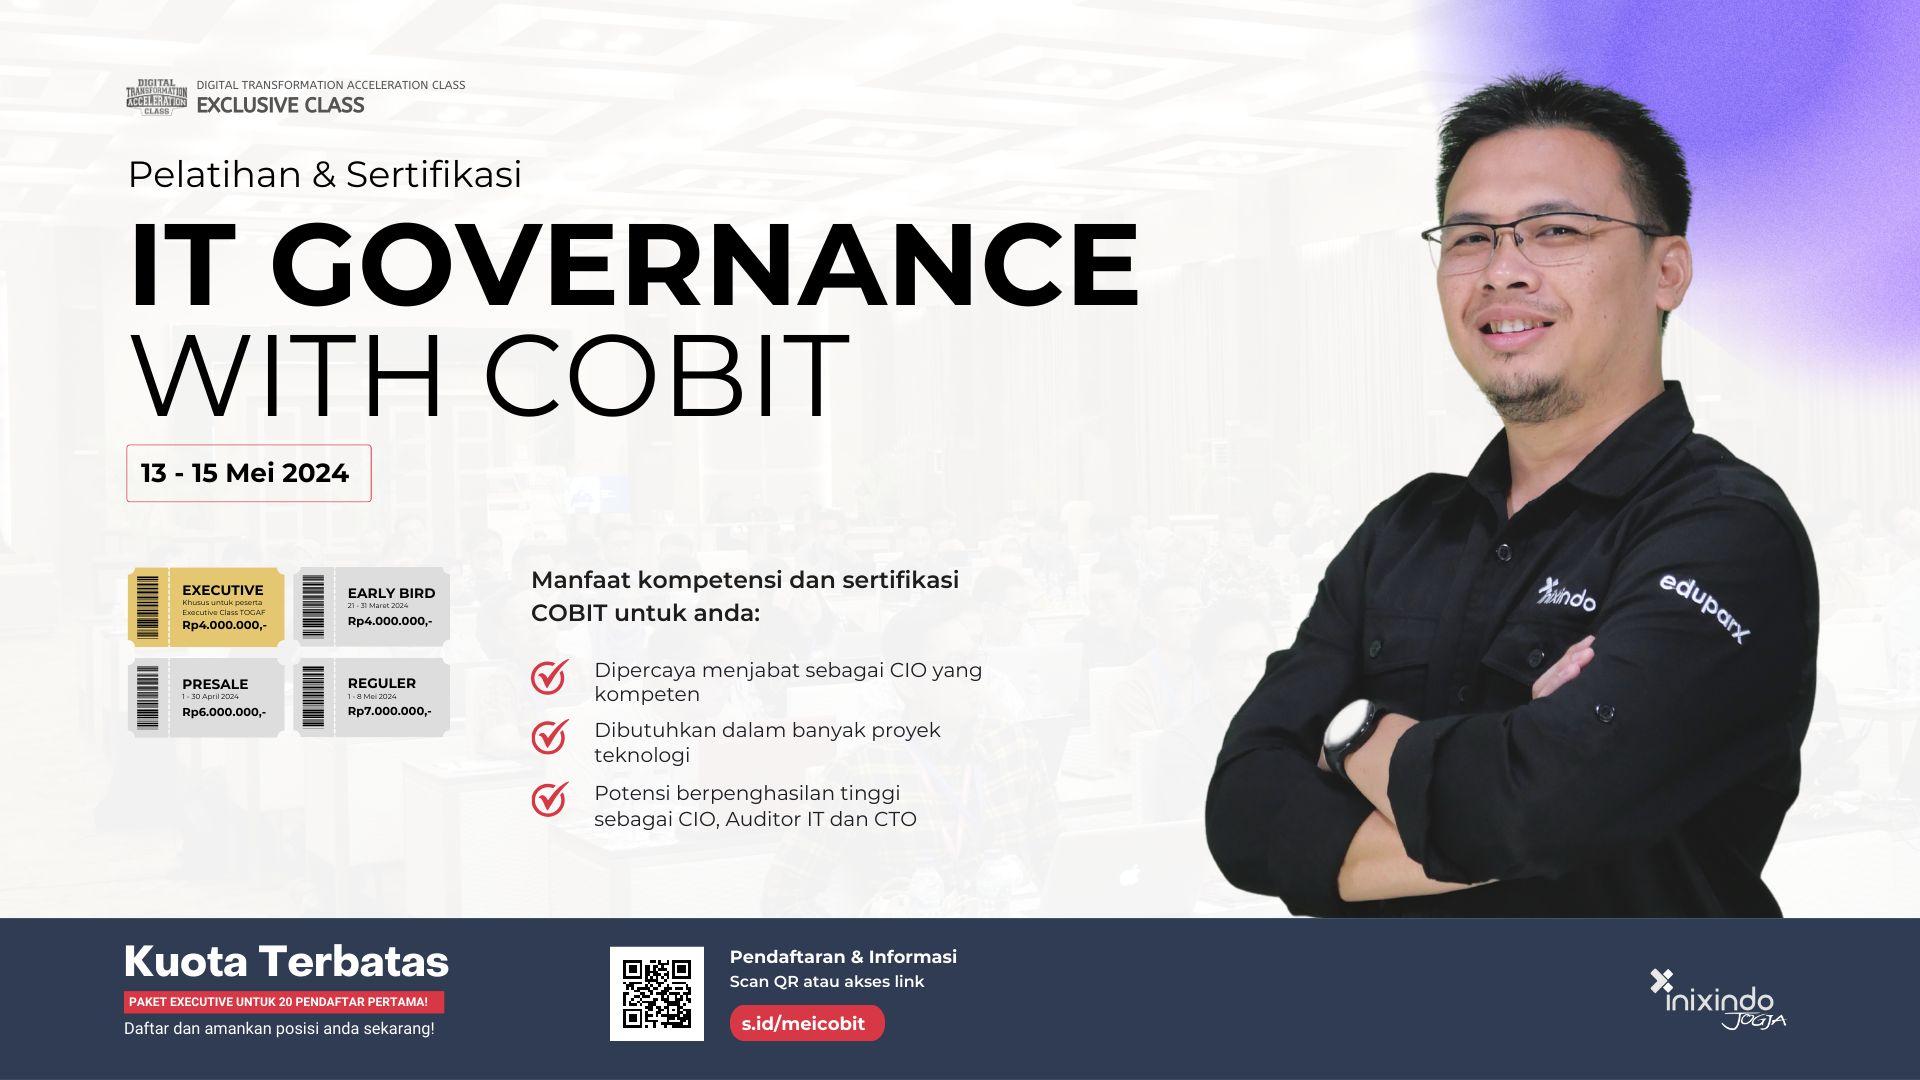 IT Governance with COBIT 2019 2